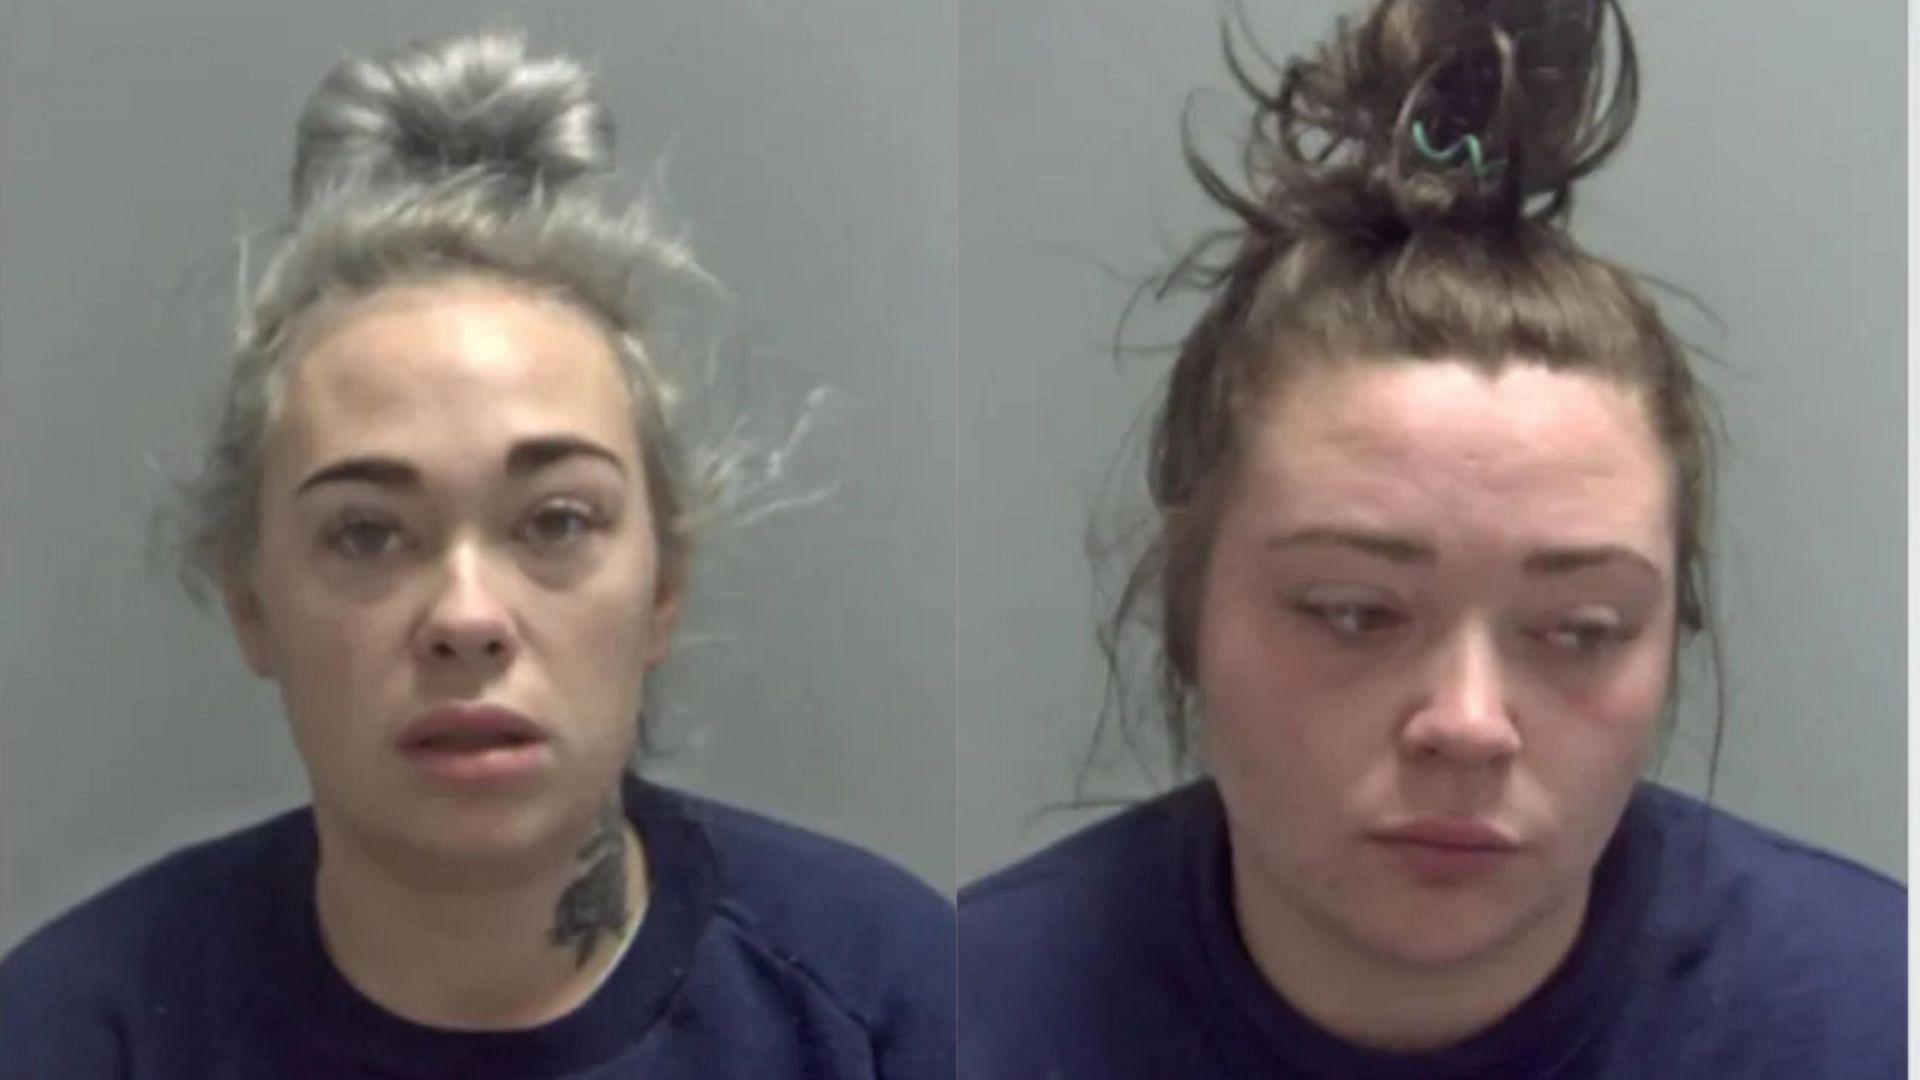 Jodie Colvin (L) &amp; Elisha Robinson (R), were both jailed for 12 years and nine months for allegedly assaulting (Image via X/@DavidSocial1976)